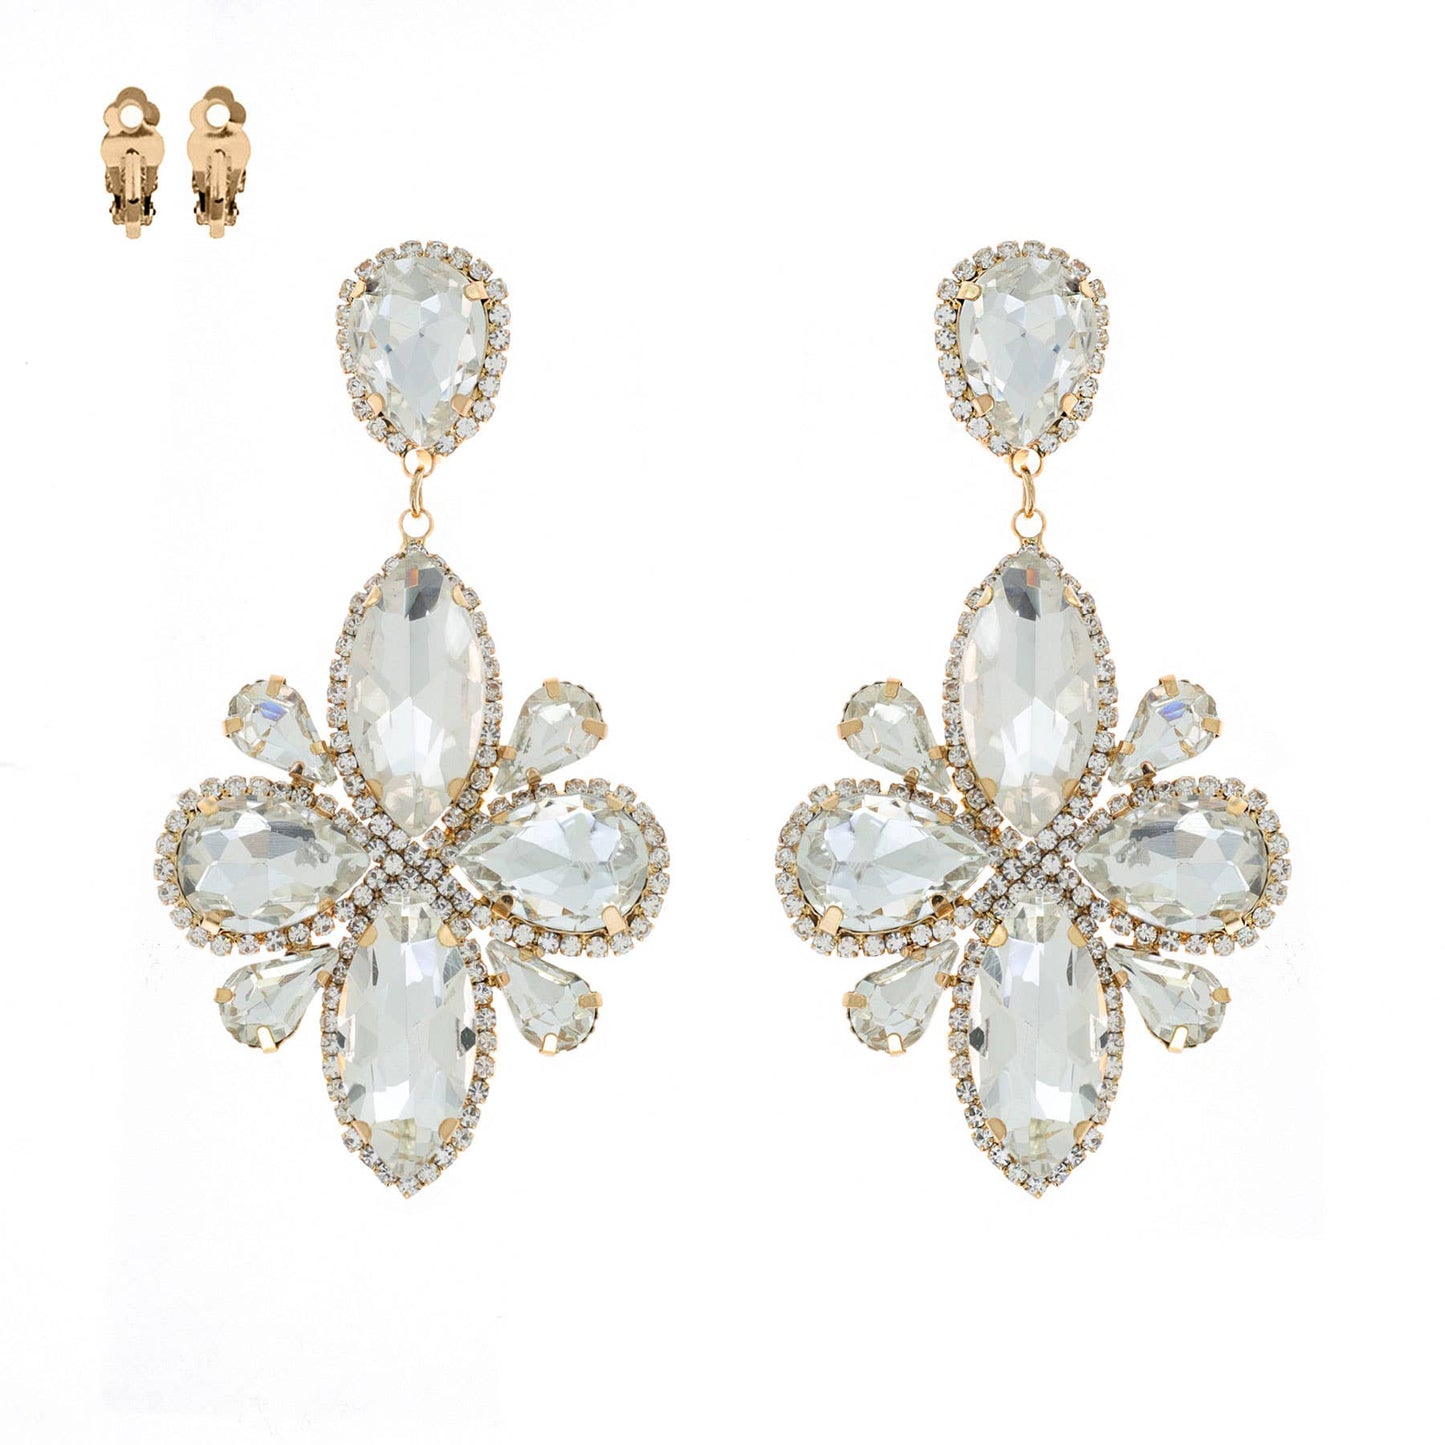 Statement Large Crystal Flower Clip On Earrings: Gold Multi Iridescent